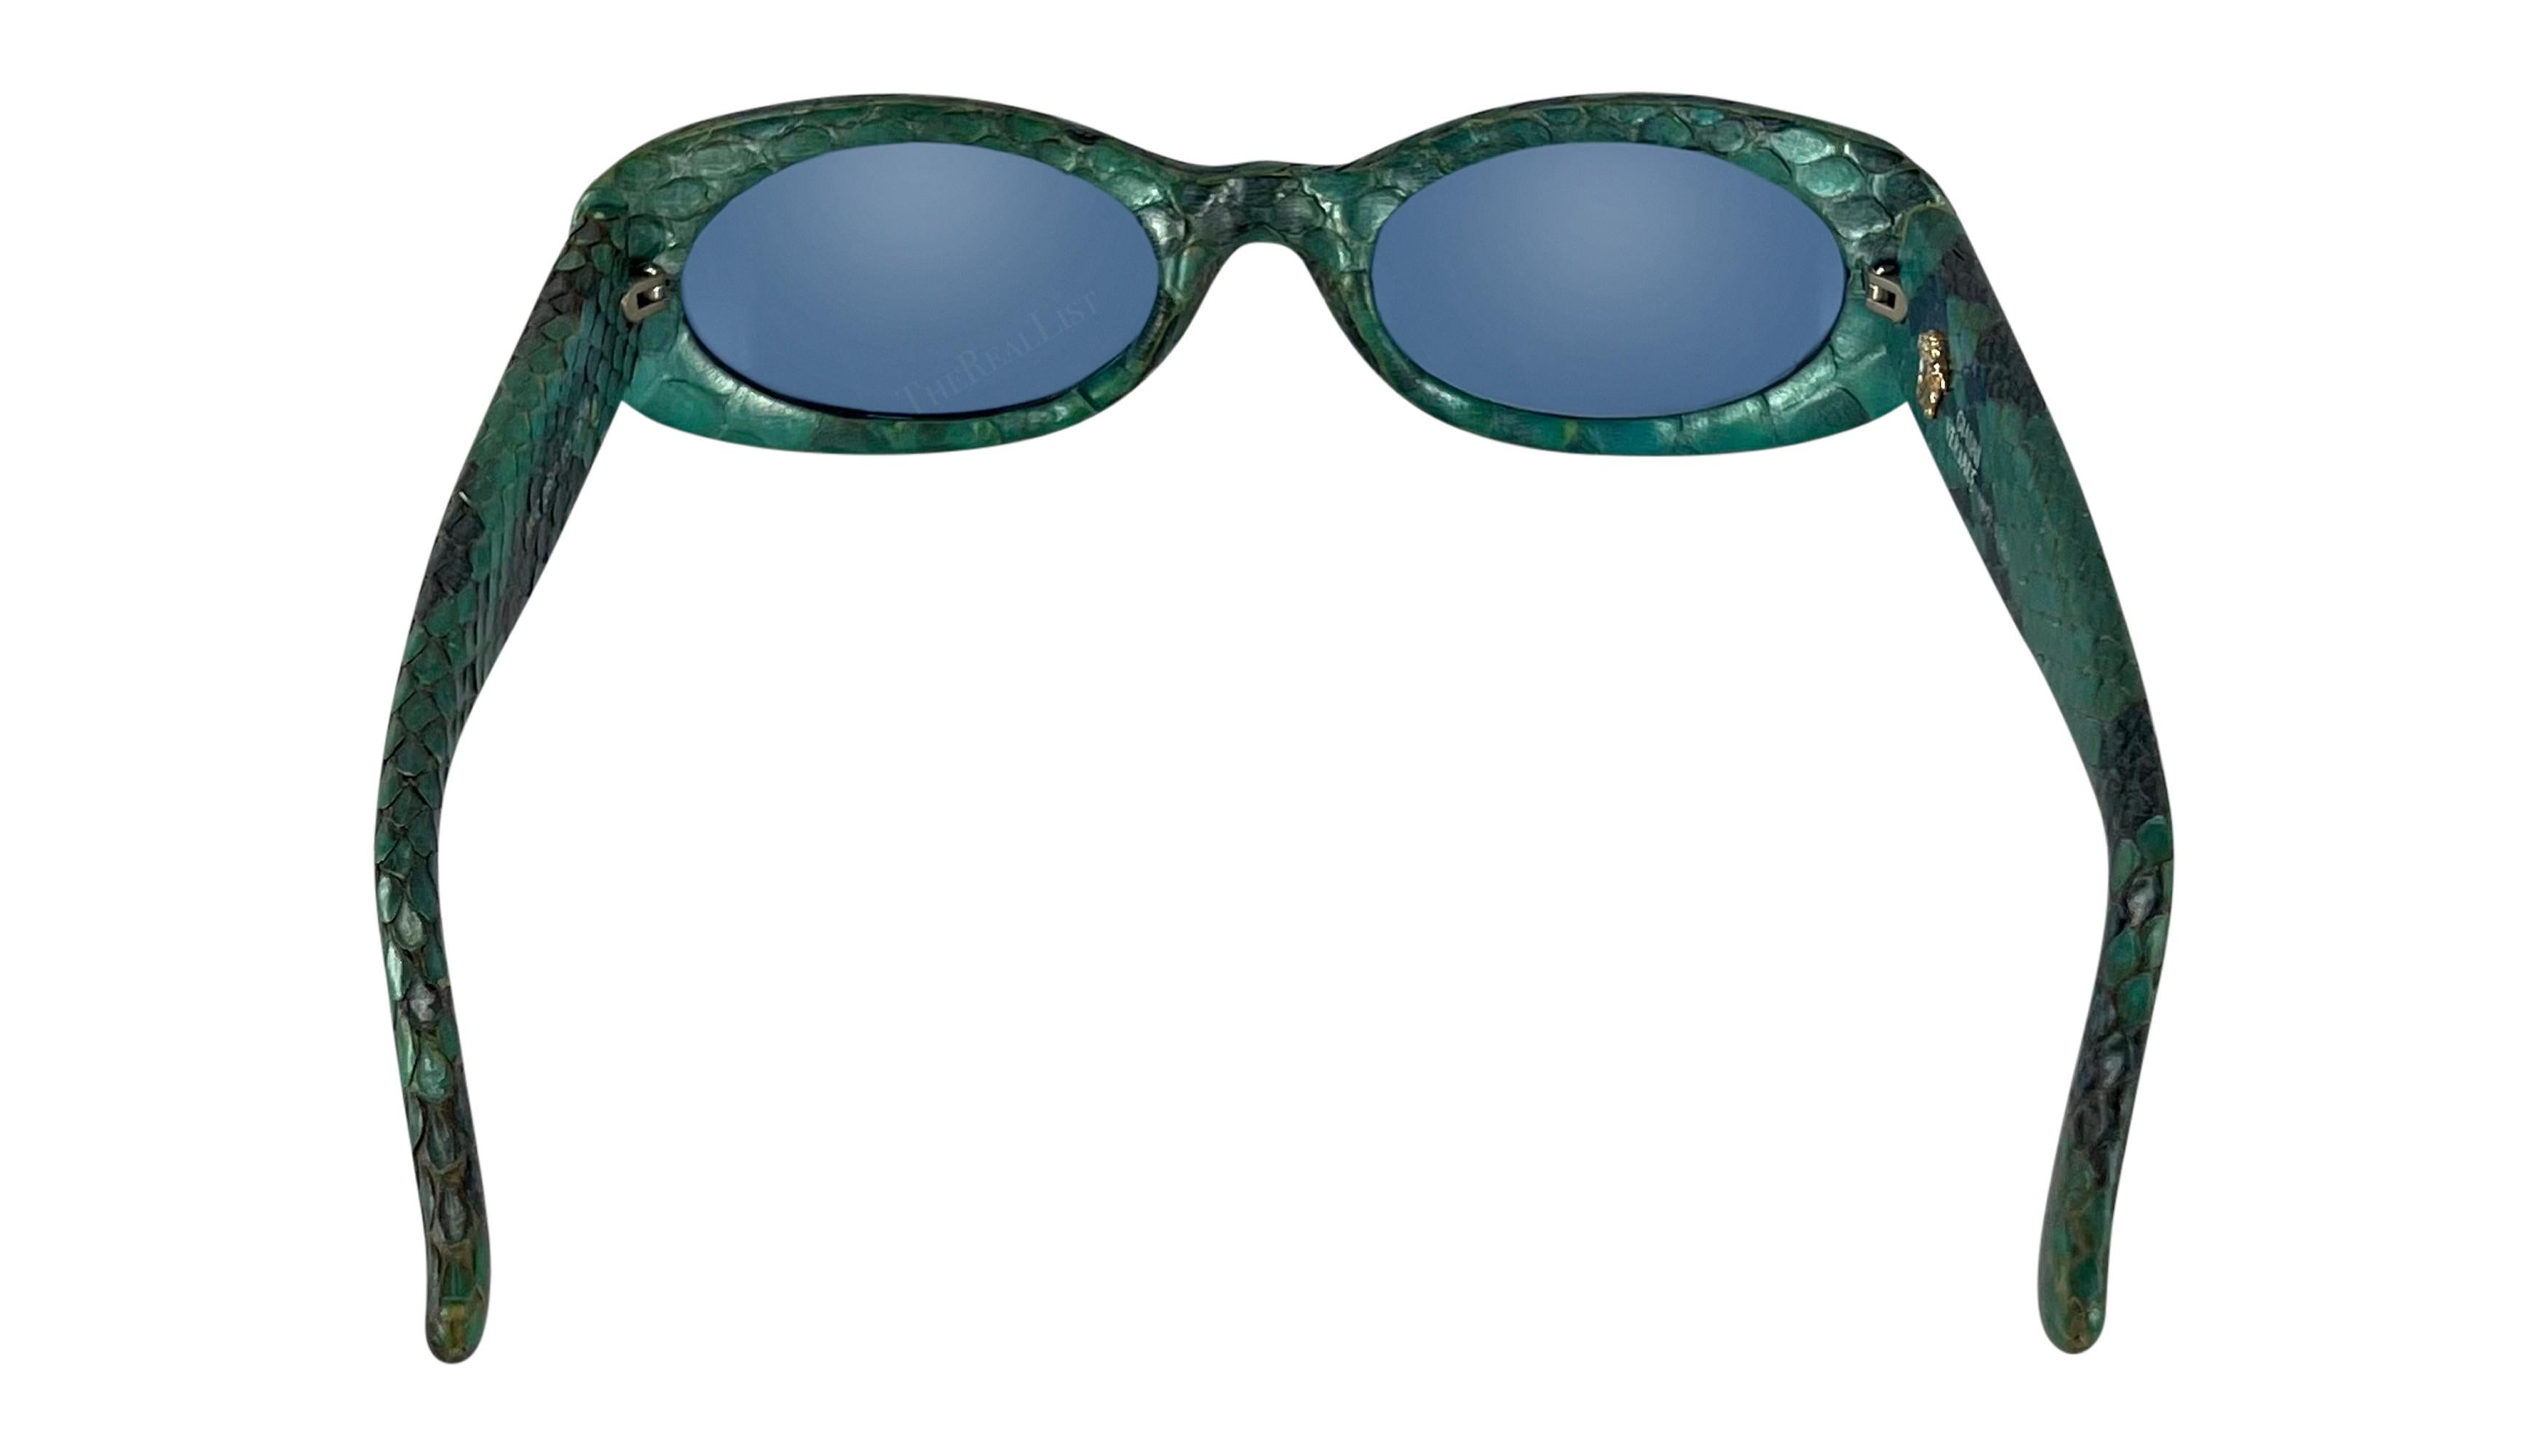 S/S 2000 Gianni Versace by Donatella Blue Genuine Python Oval Sunglasses For Sale 2